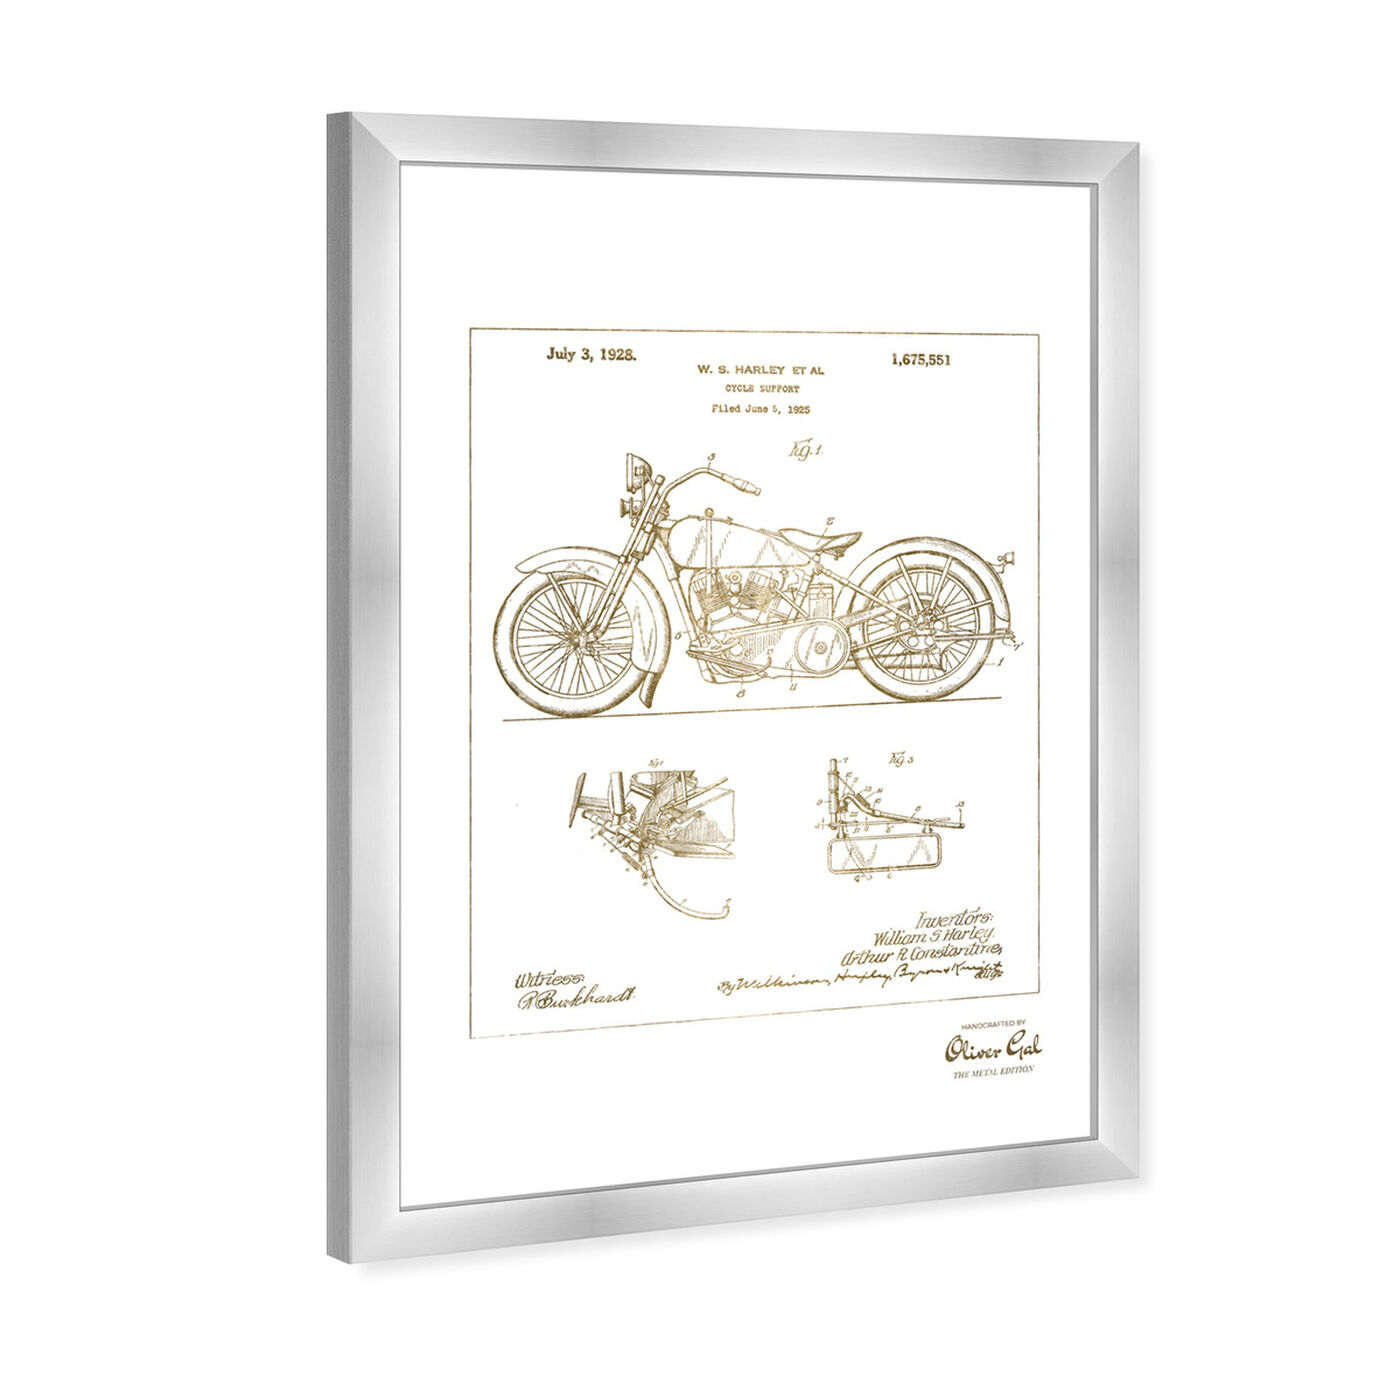 Angled view of Harley, 1928 - Gold featuring transportation and motorcycles art.